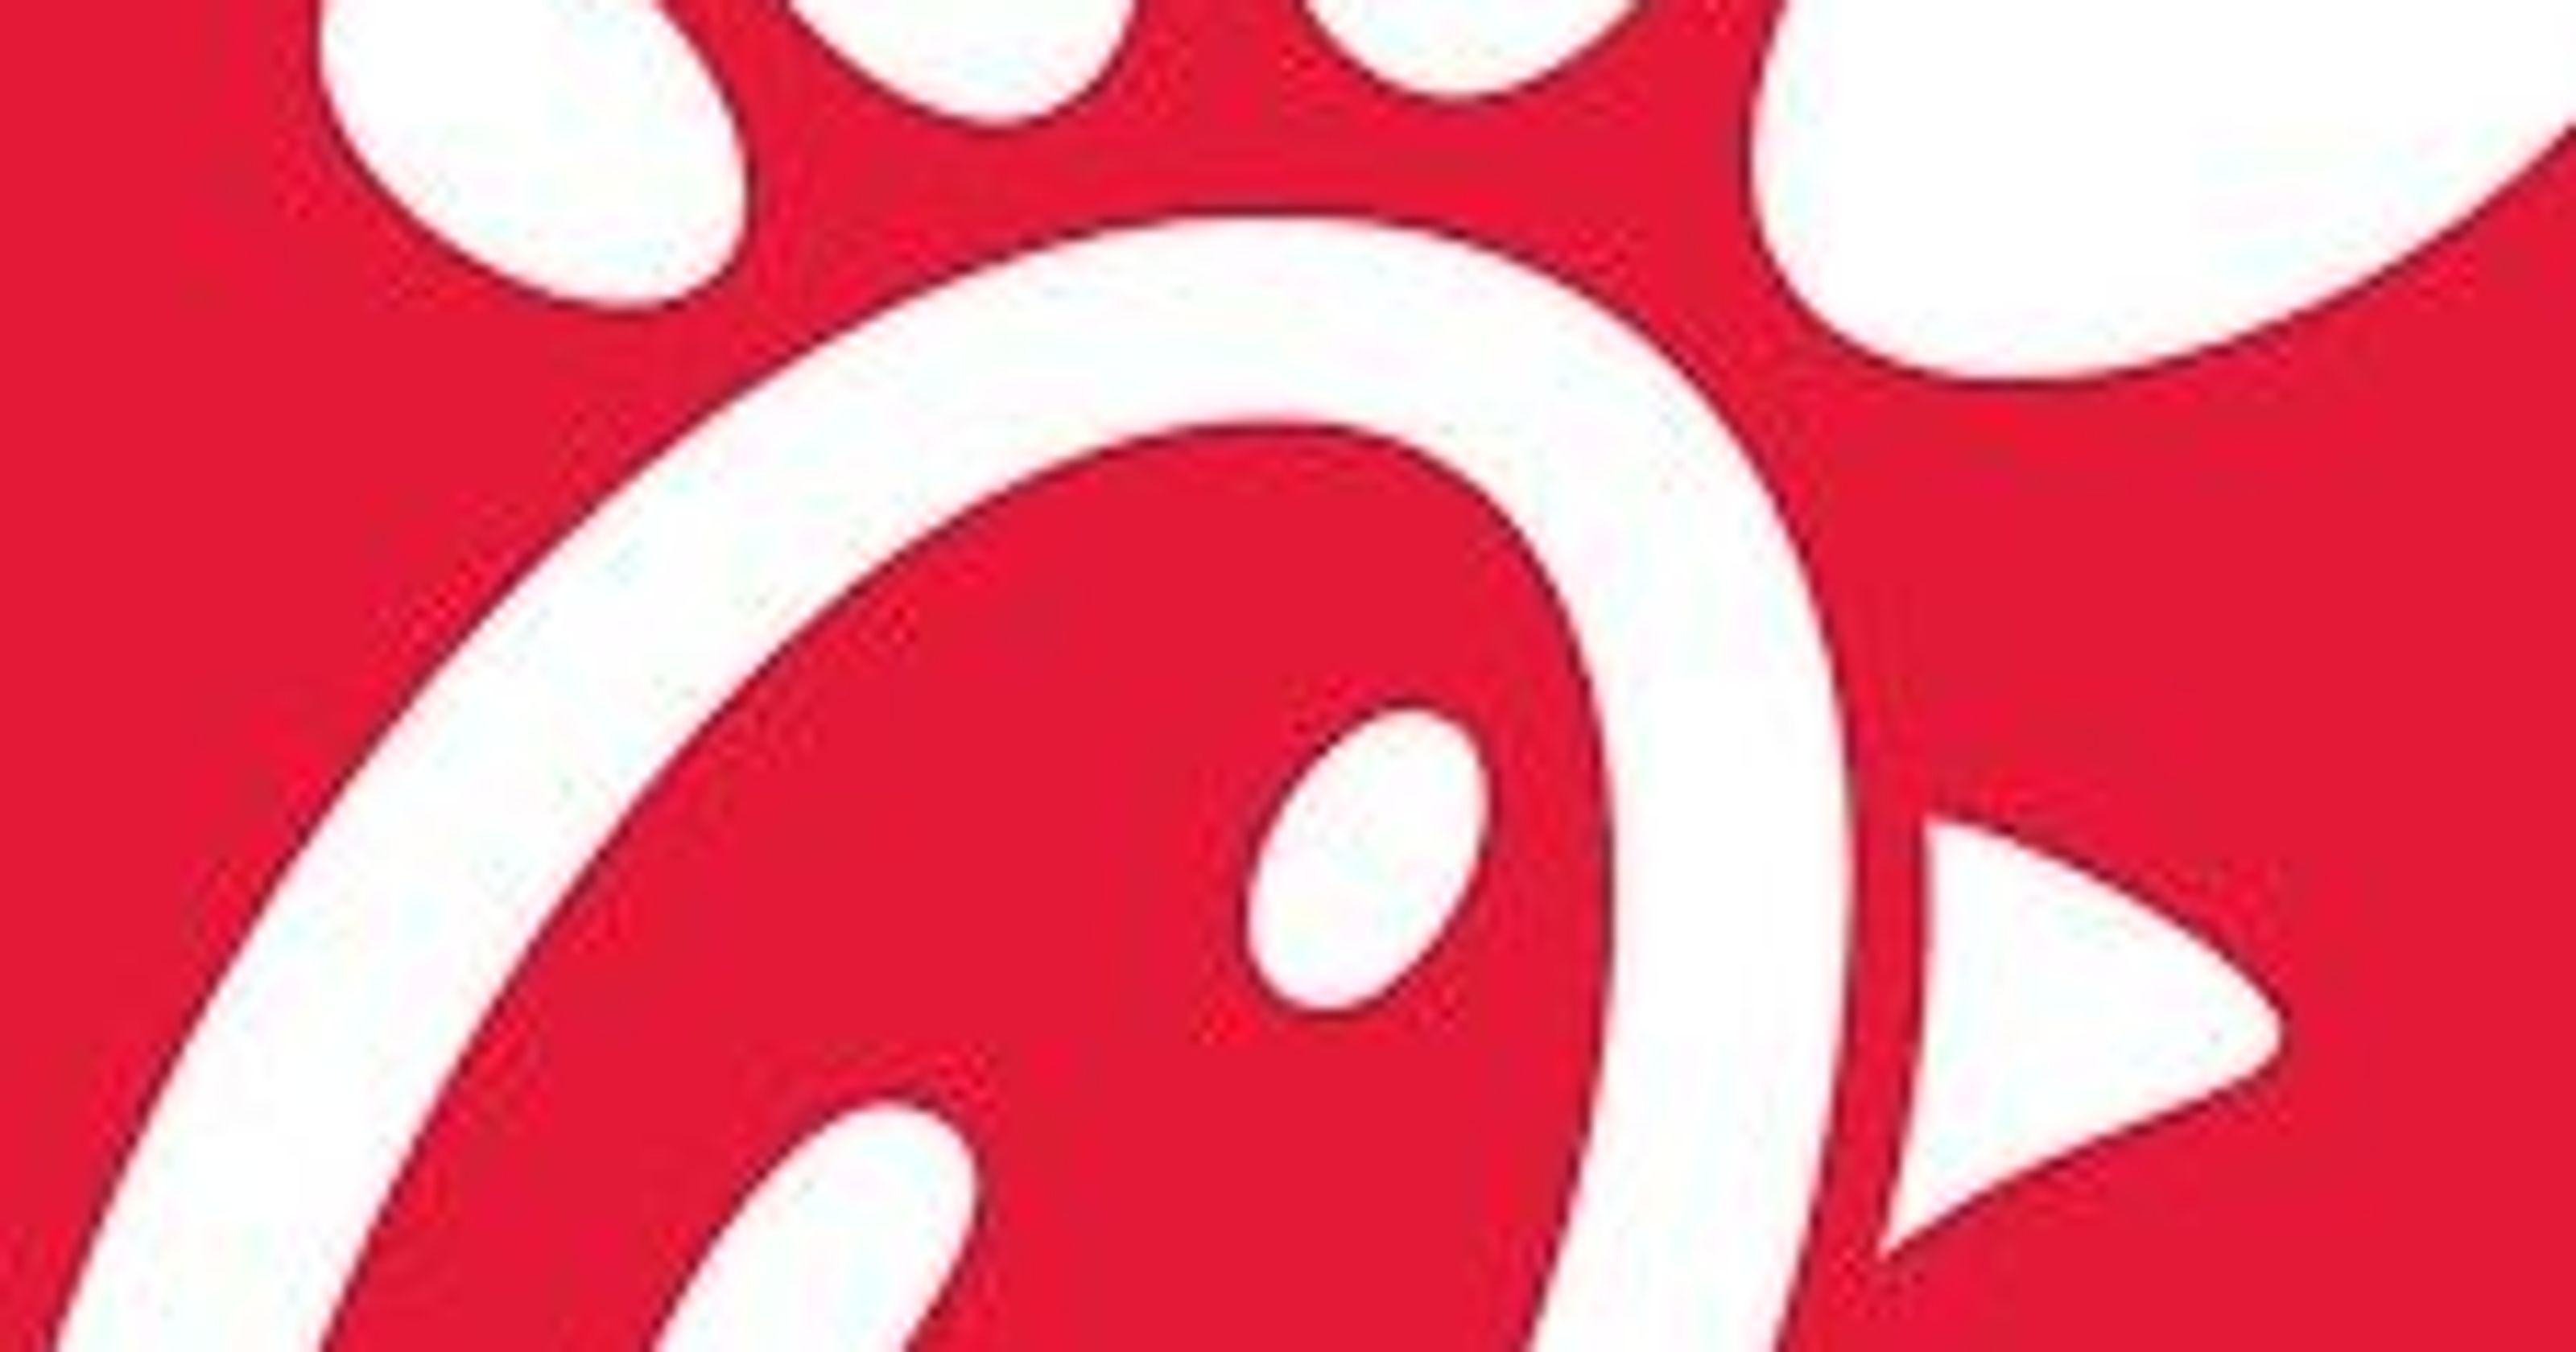 Chick-fil-A Logo - How To Get Free Chick Fil A For A Year At The New West Chester Store